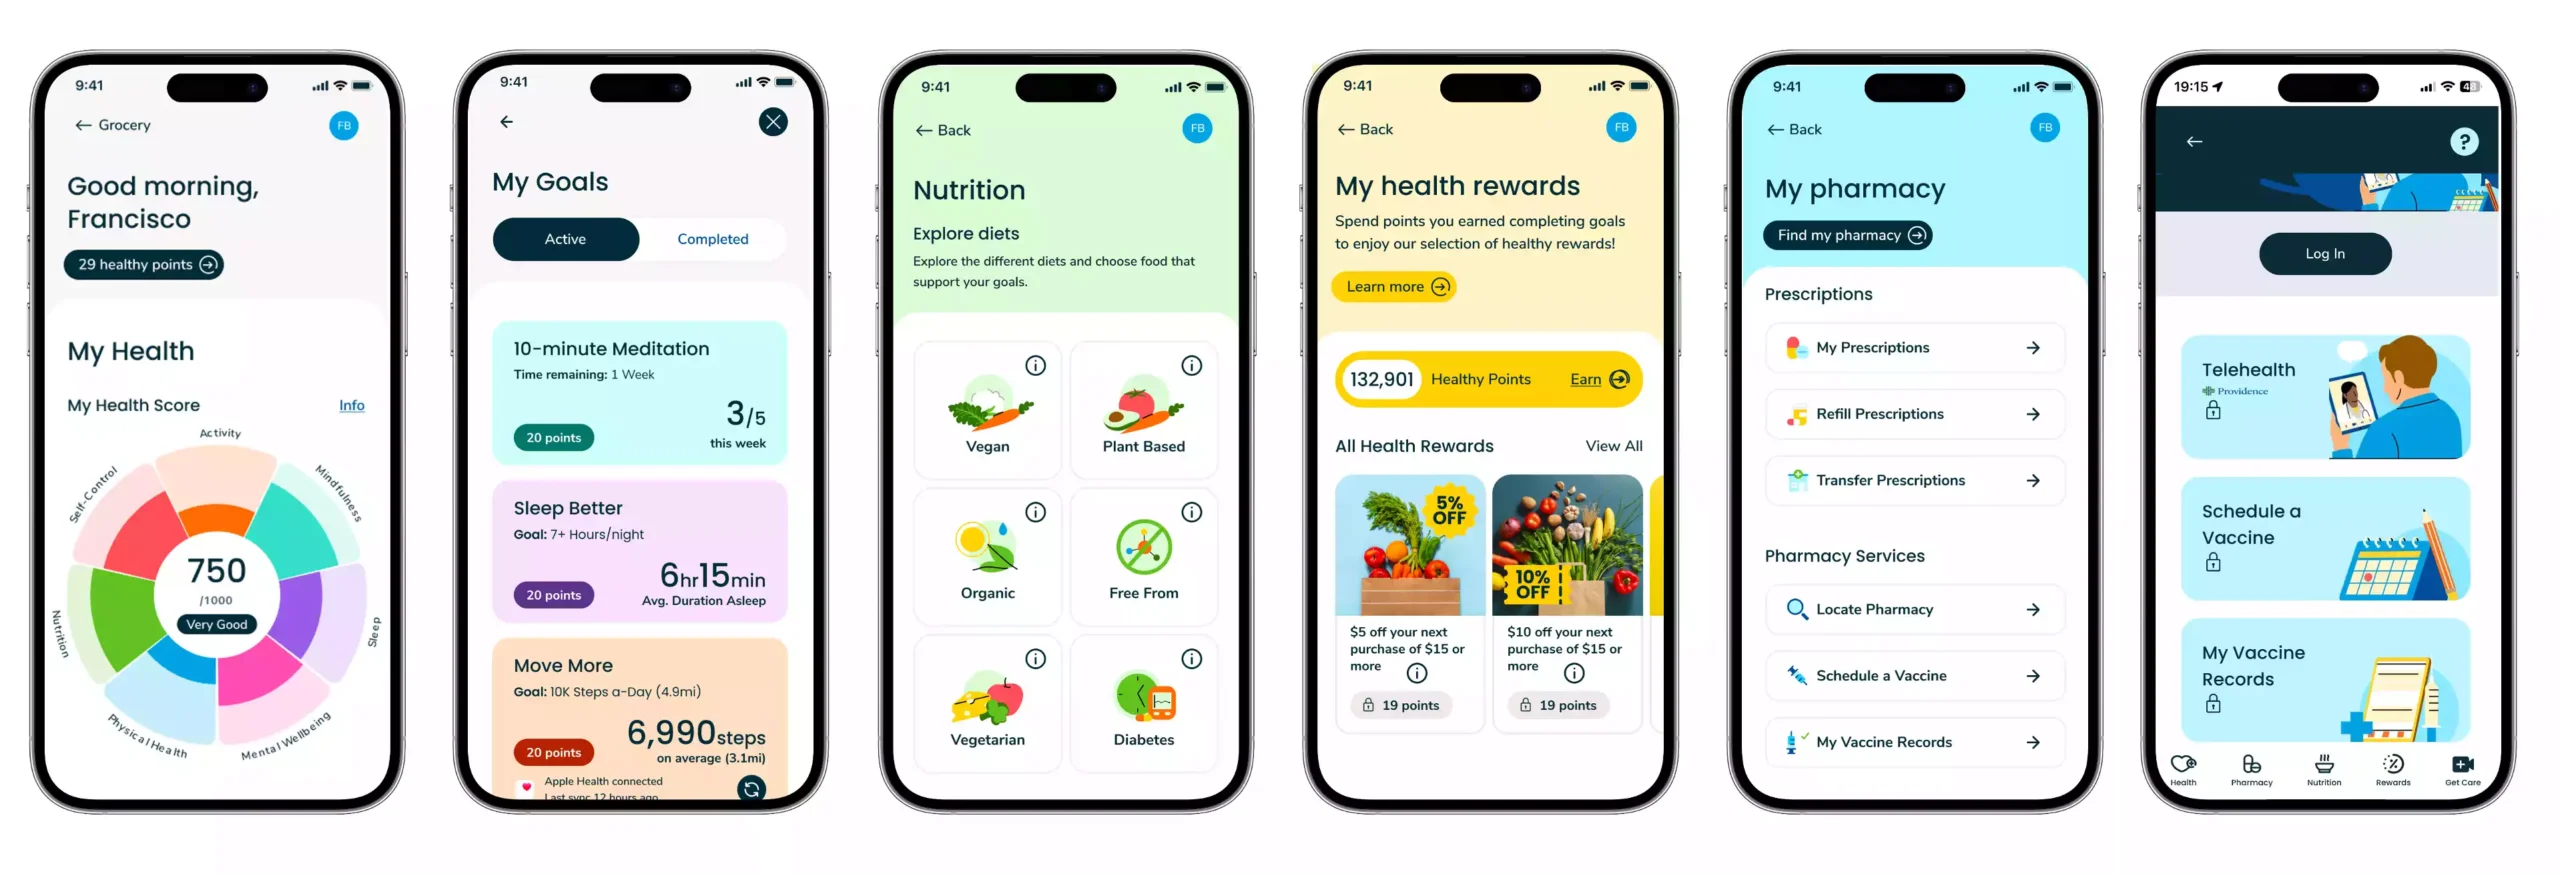 Albertsons Pushes Into Digital Health and Wellness with ‘Sincerely Health,’ a Reward